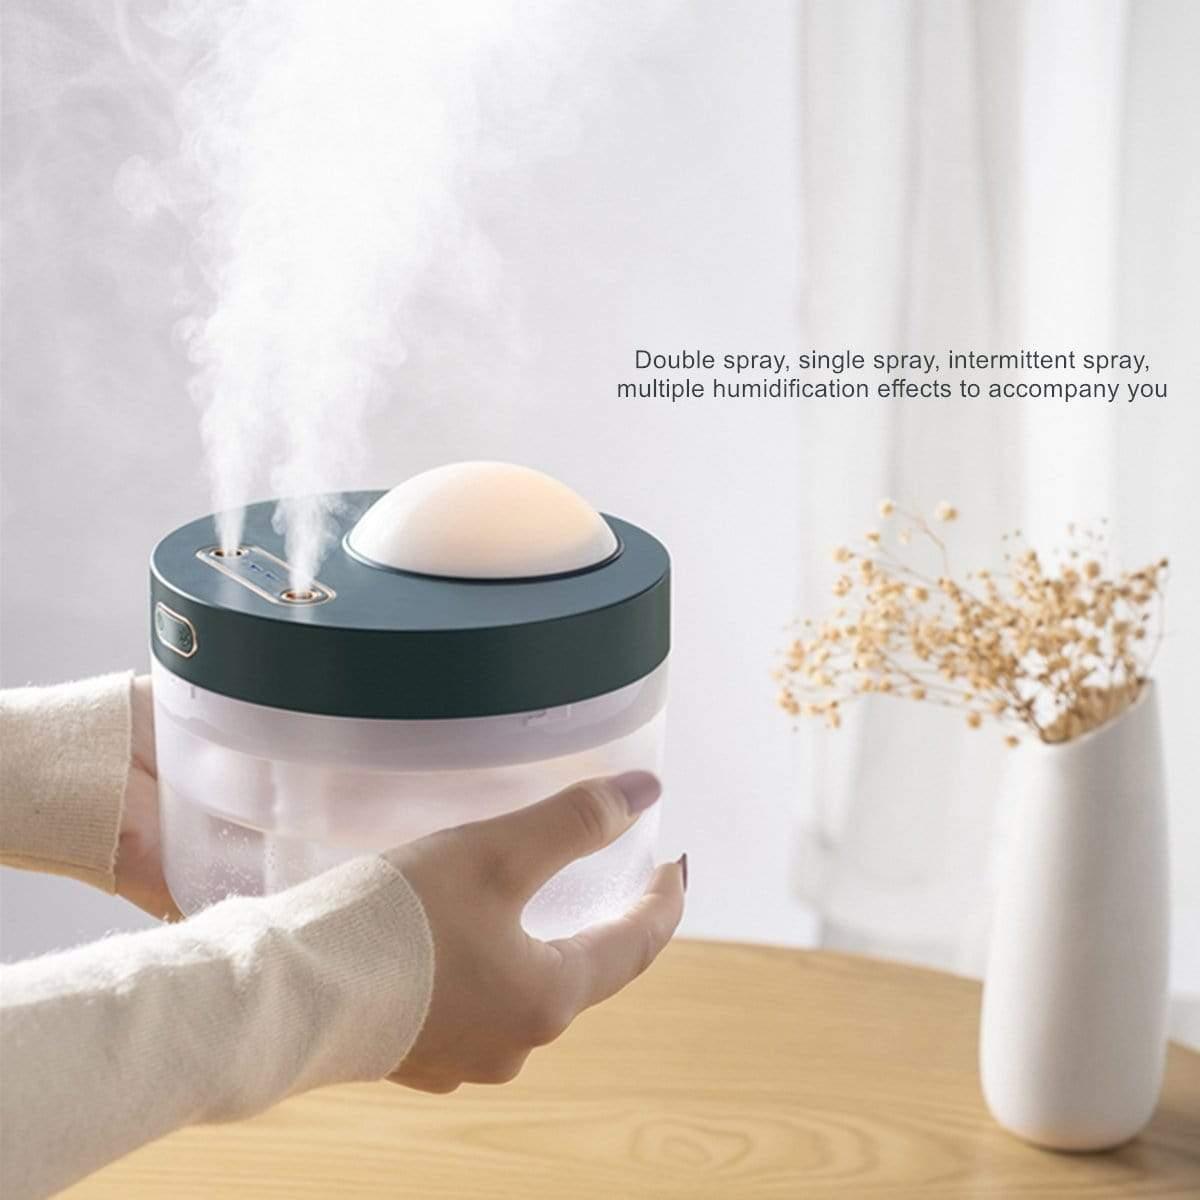 ezy2find mist humidifier Double Spray Projection Humidifier, Portable Mist Humidifier with Starry Sky Projector and Soft Night Light, Suitable for Room Office Home Double Spray Projection Humidifier, Portable Mist Humidifier with Starry Sky Projector and Soft Night Light, Suitable for Room Office Home